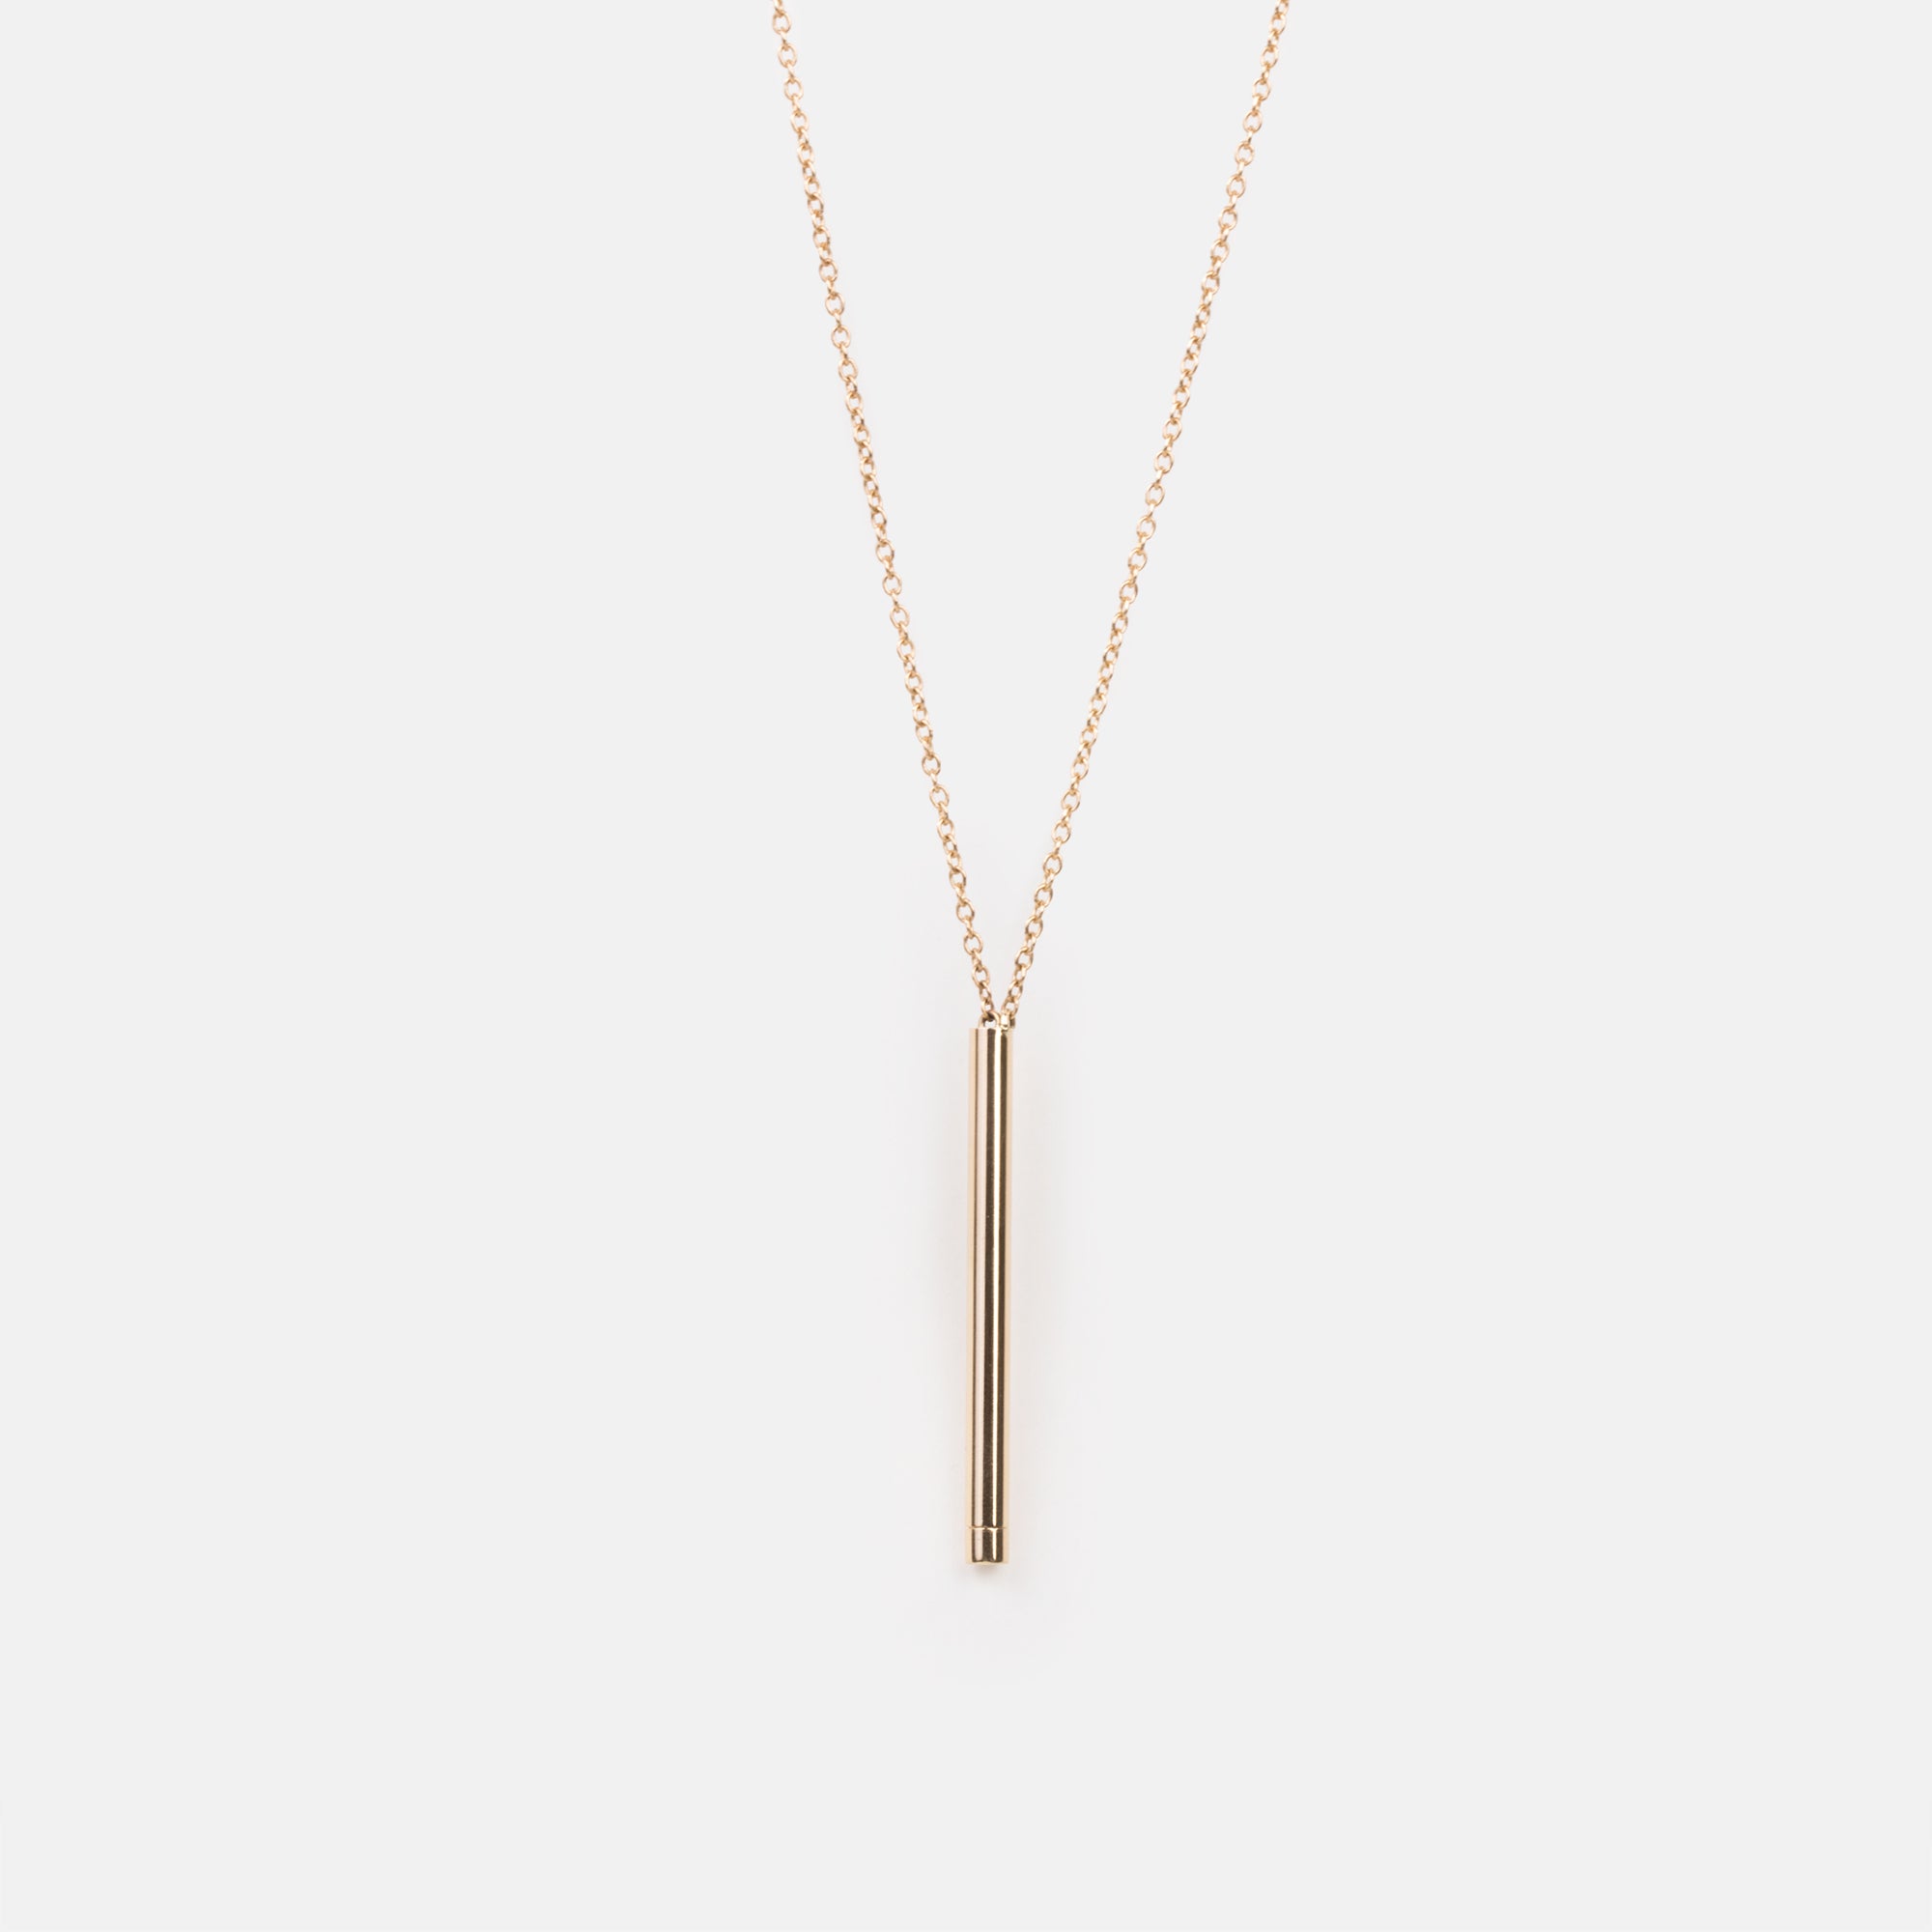 Drasa Unique Necklace in 14k Rose Gold By SHW Fine Jewelry NYC